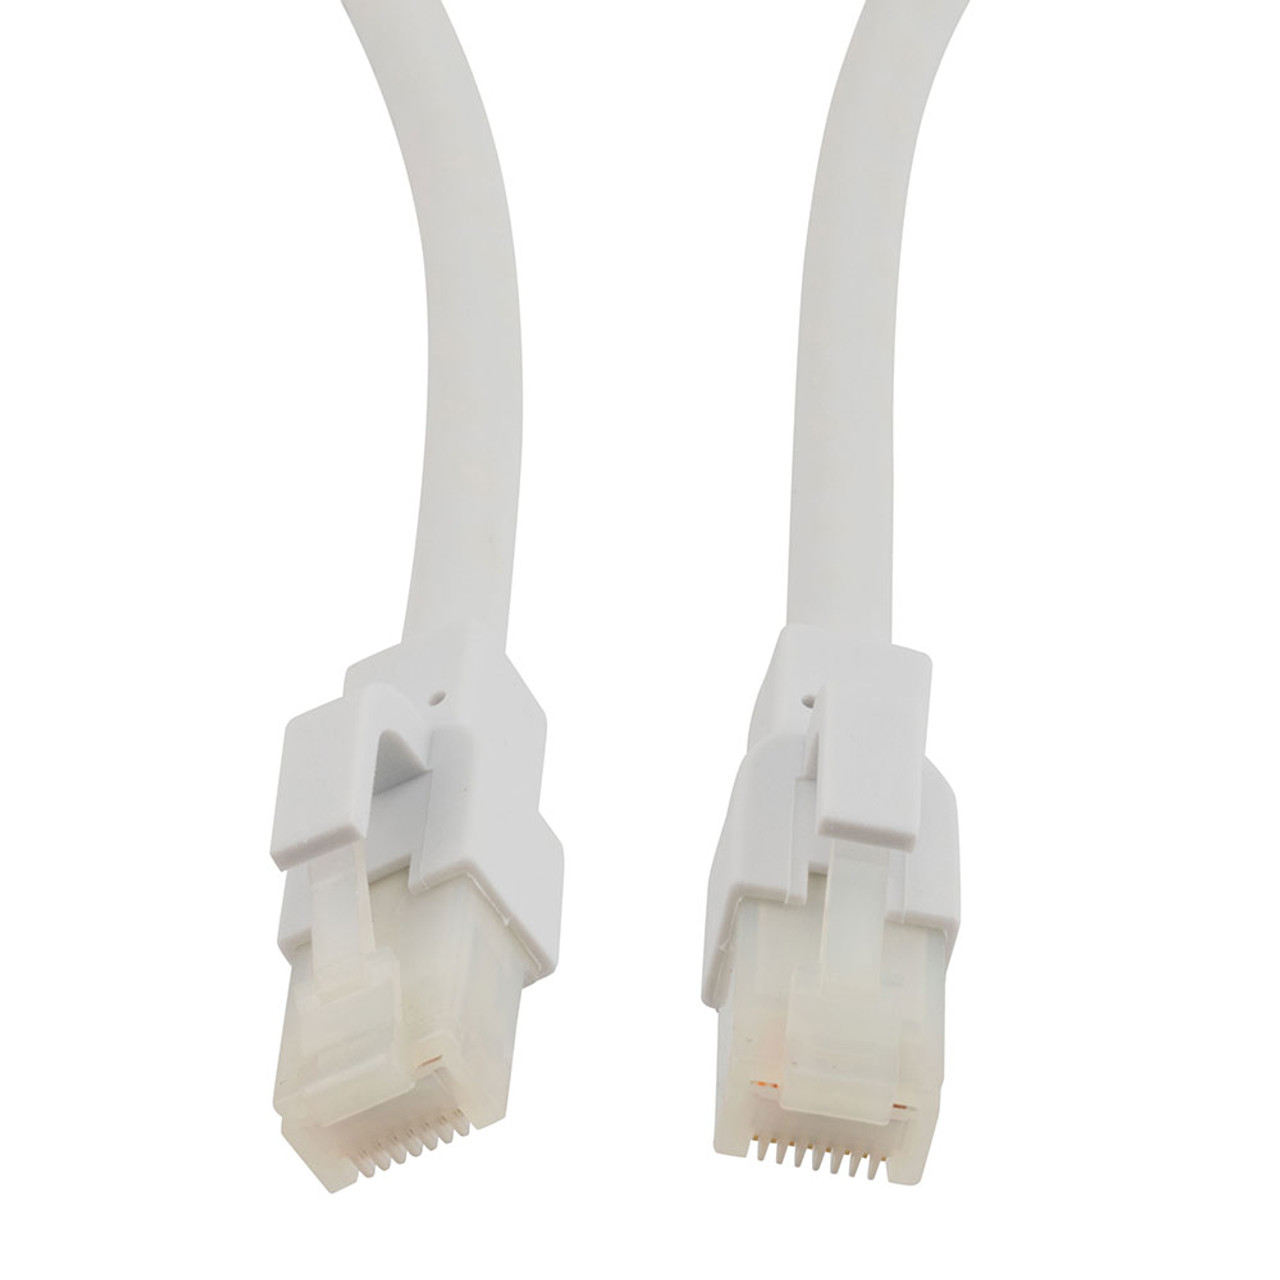 Category 6a 10 Gbps Ethernet Antibacterial Antimicrobial Cable Assembly, RJ45 Male/Plug, U/UTP, 24 AWG, PVC Antibacterial, White, 1 FT